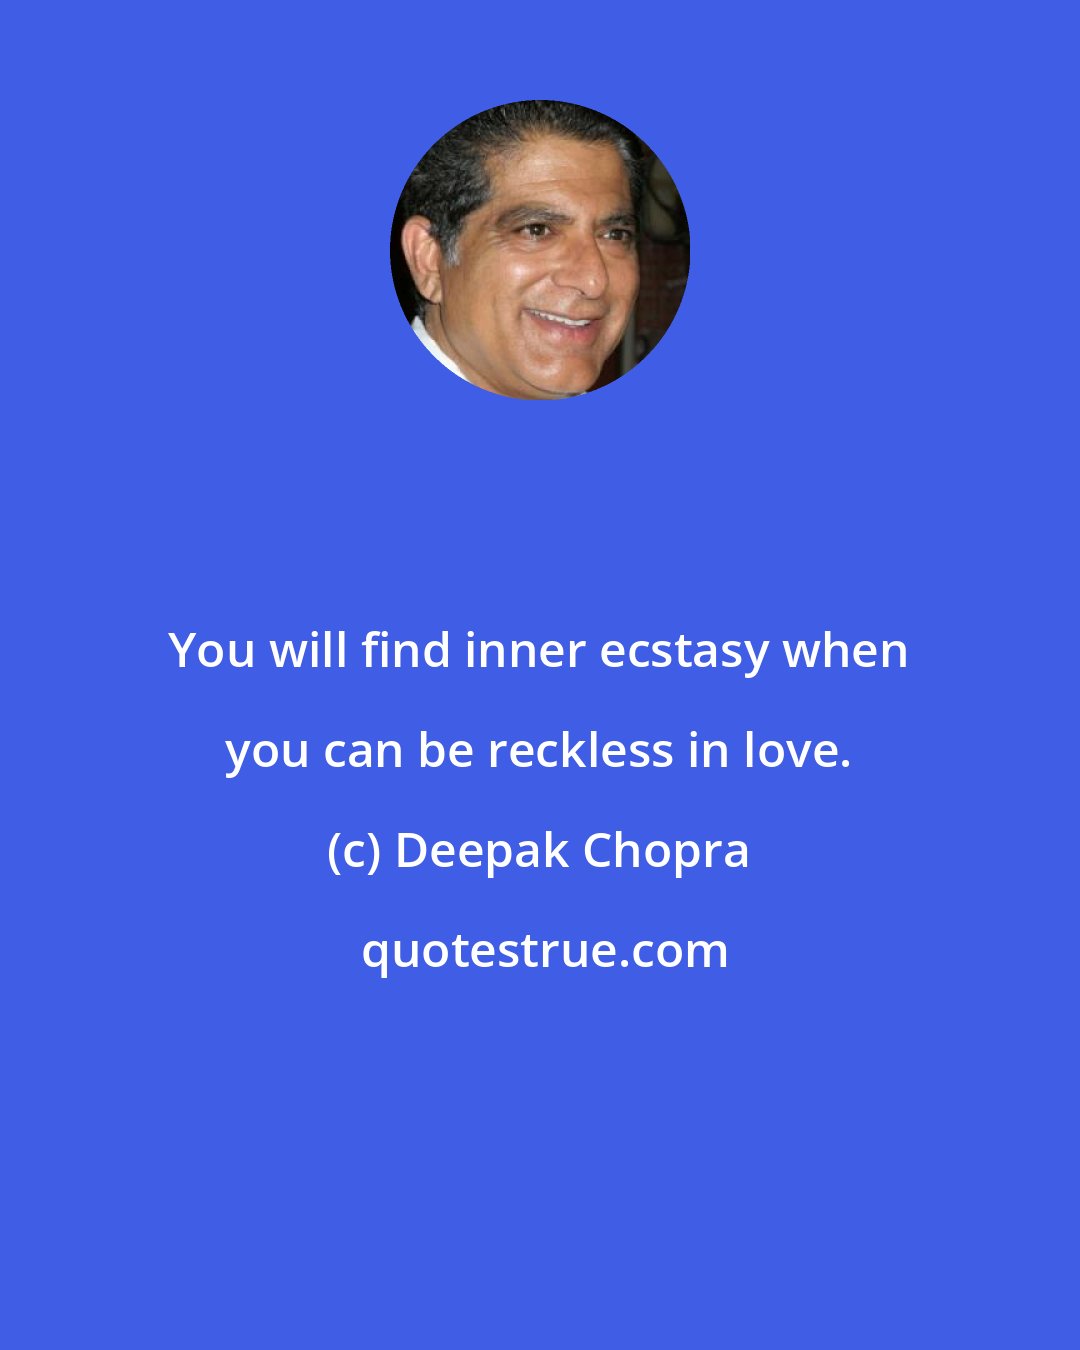 Deepak Chopra: You will find inner ecstasy when you can be reckless in love.